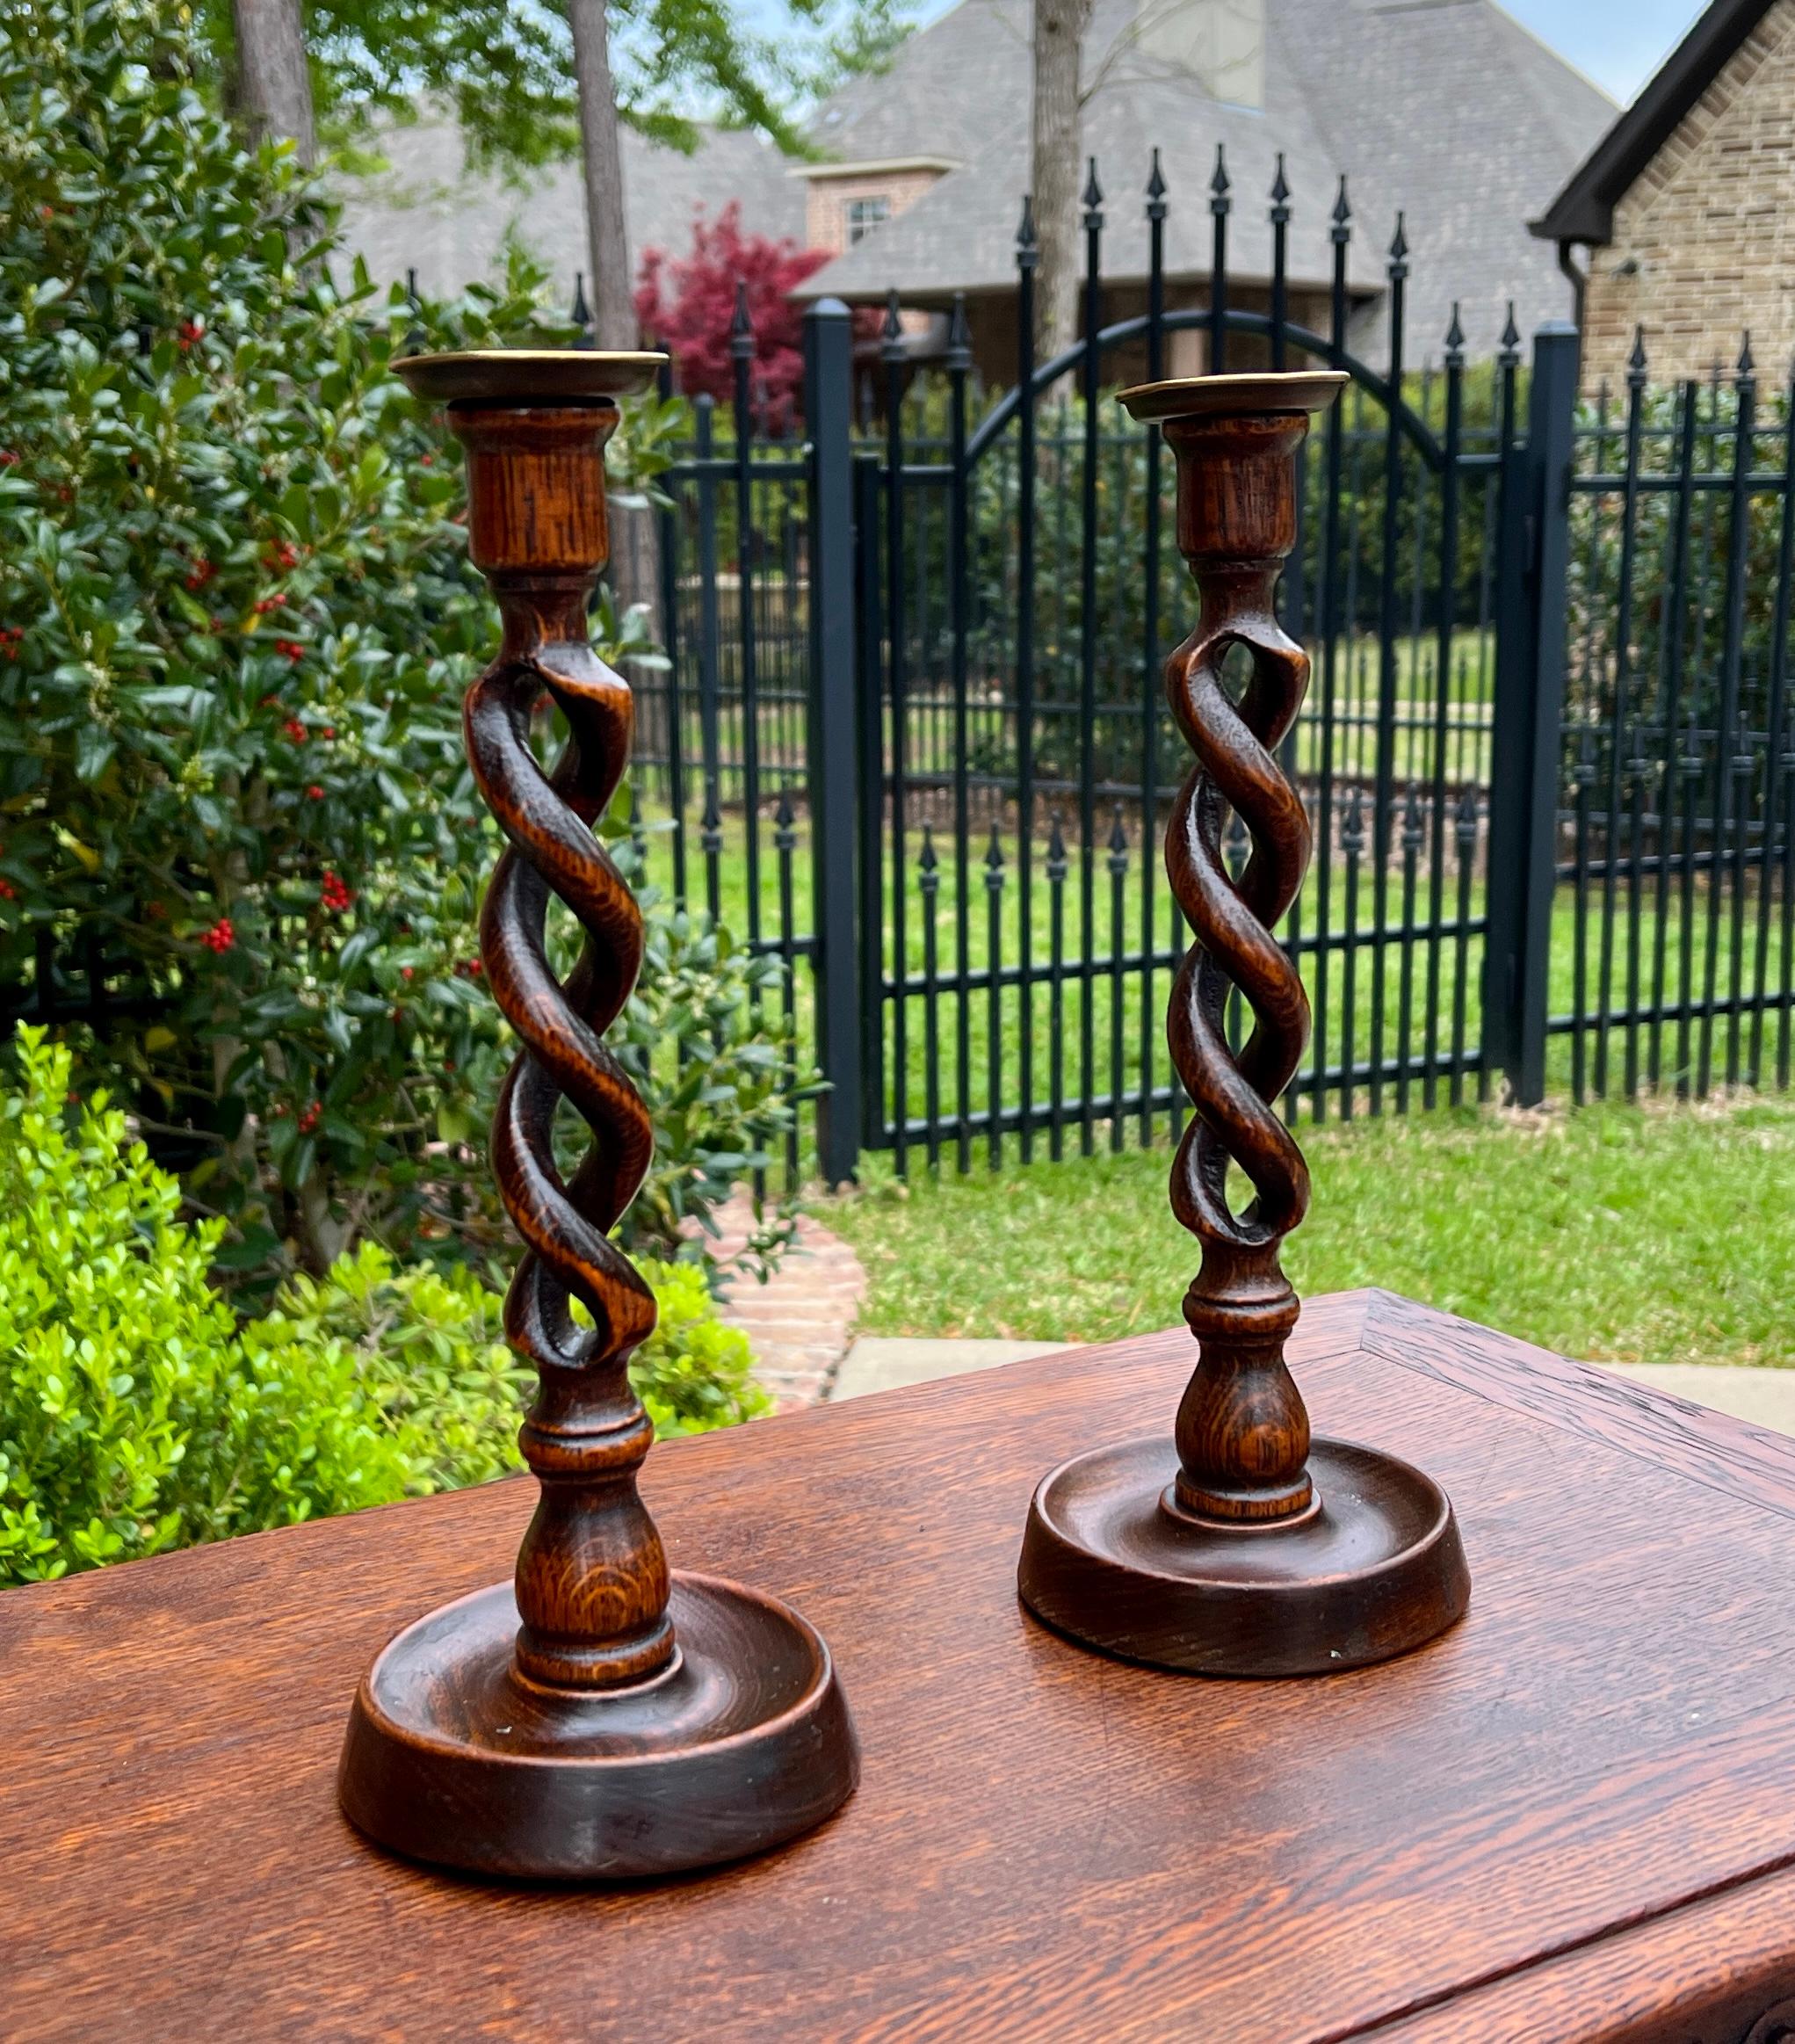  CHARMING Pair of Antique English Oak OPEN BARLEY TWIST Candlesticks Candle Holders c. 1920s

Beautiful twist with dark oak patina

12.5